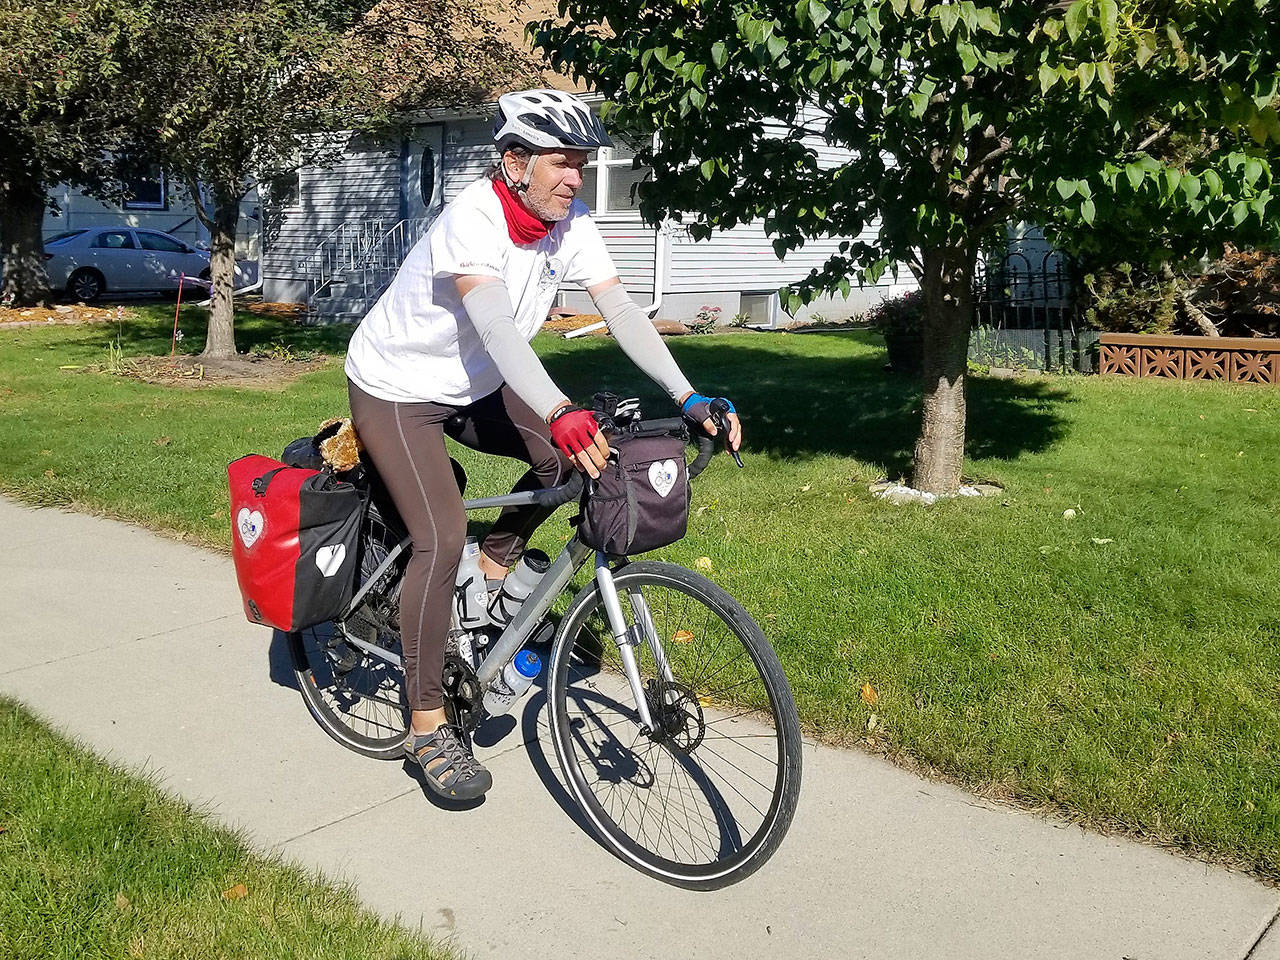 Kirk Gillock of North Bend on his 4,233 mile cycle tour across 13 states to spread the message of love, unity and balance. Photo courtesy of Kirk Gillock.